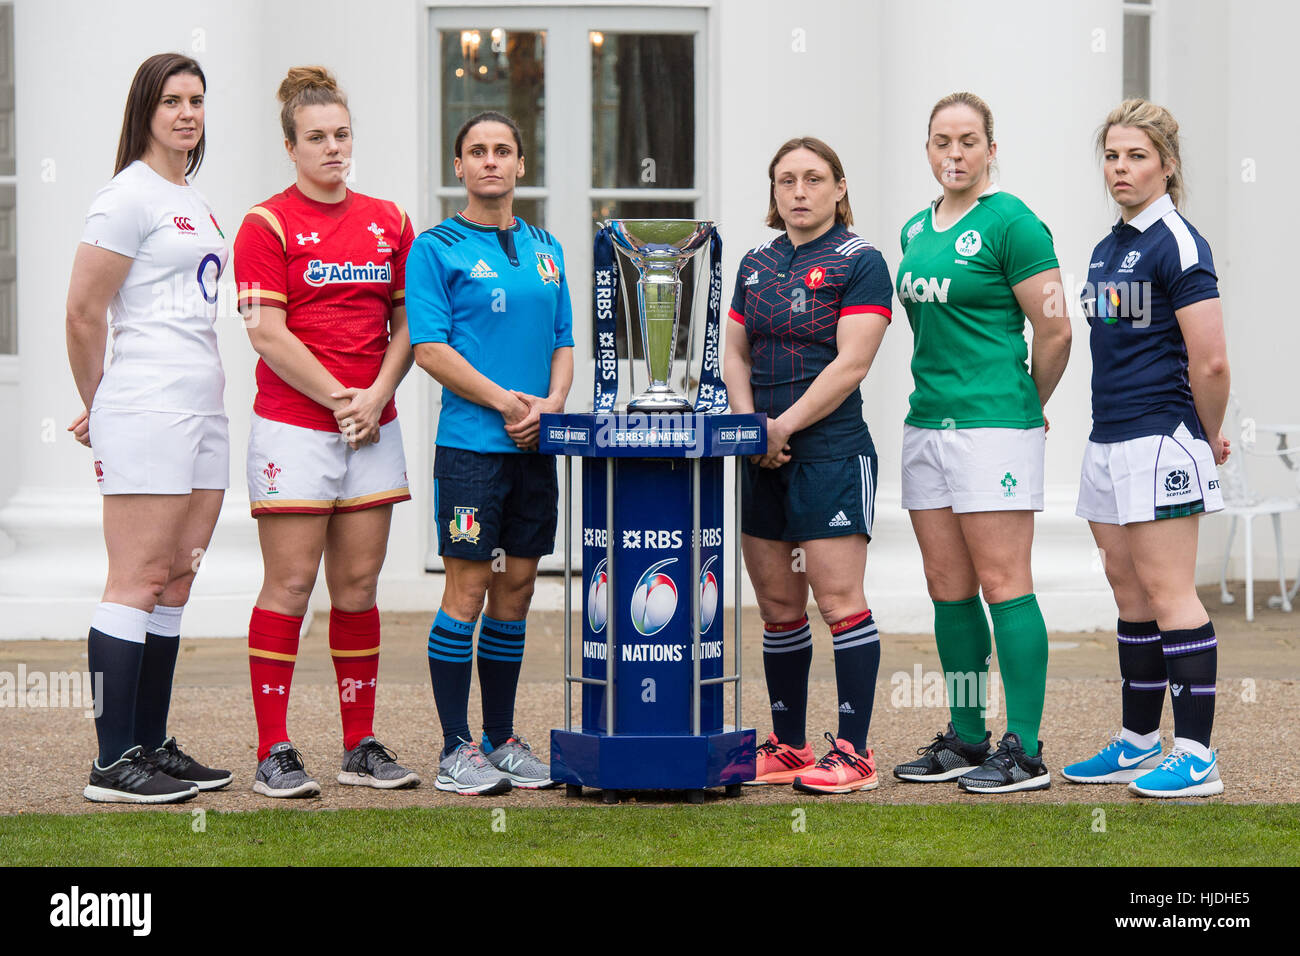 London, UK. 25th January 2017. Womens Captains, Sarah Hunter, Carys Phillips, Sara Barattin, Gaelle Mignot, Niamh Briggs and Lisa Martin with the 6 Nations trophy at the launch of the RBS 6 Nations Championship at the Hurlingham Club London Credit: Alan D West/Alamy Live News Stock Photo